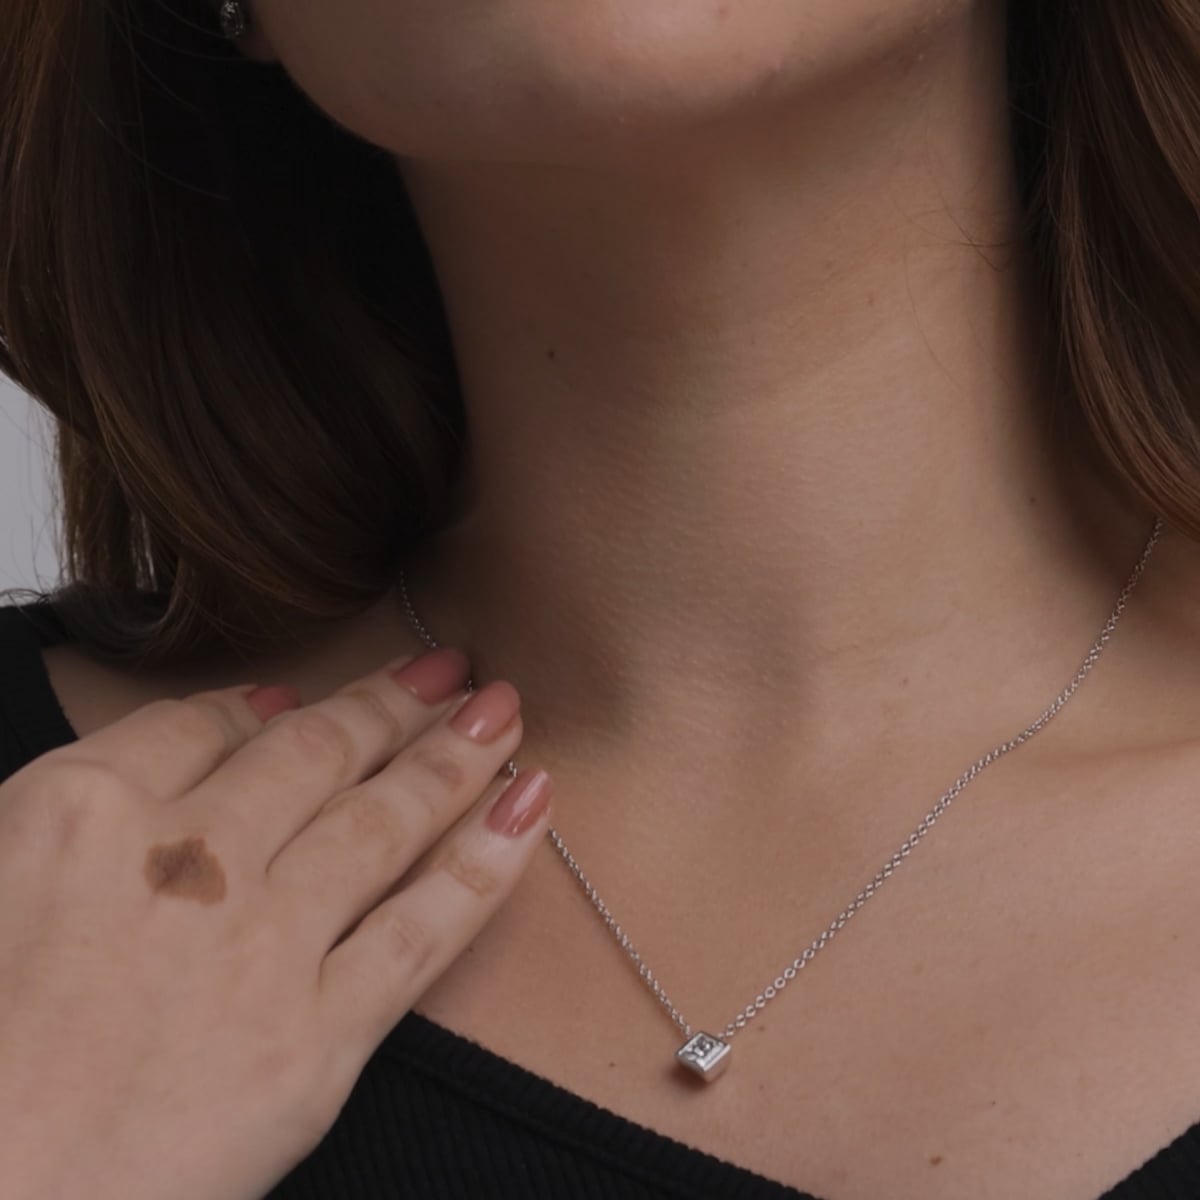 product video for 1 ctw Princess Lab Grown Diamond Bezel Set Solitaire Pendant with Adjustable Chain